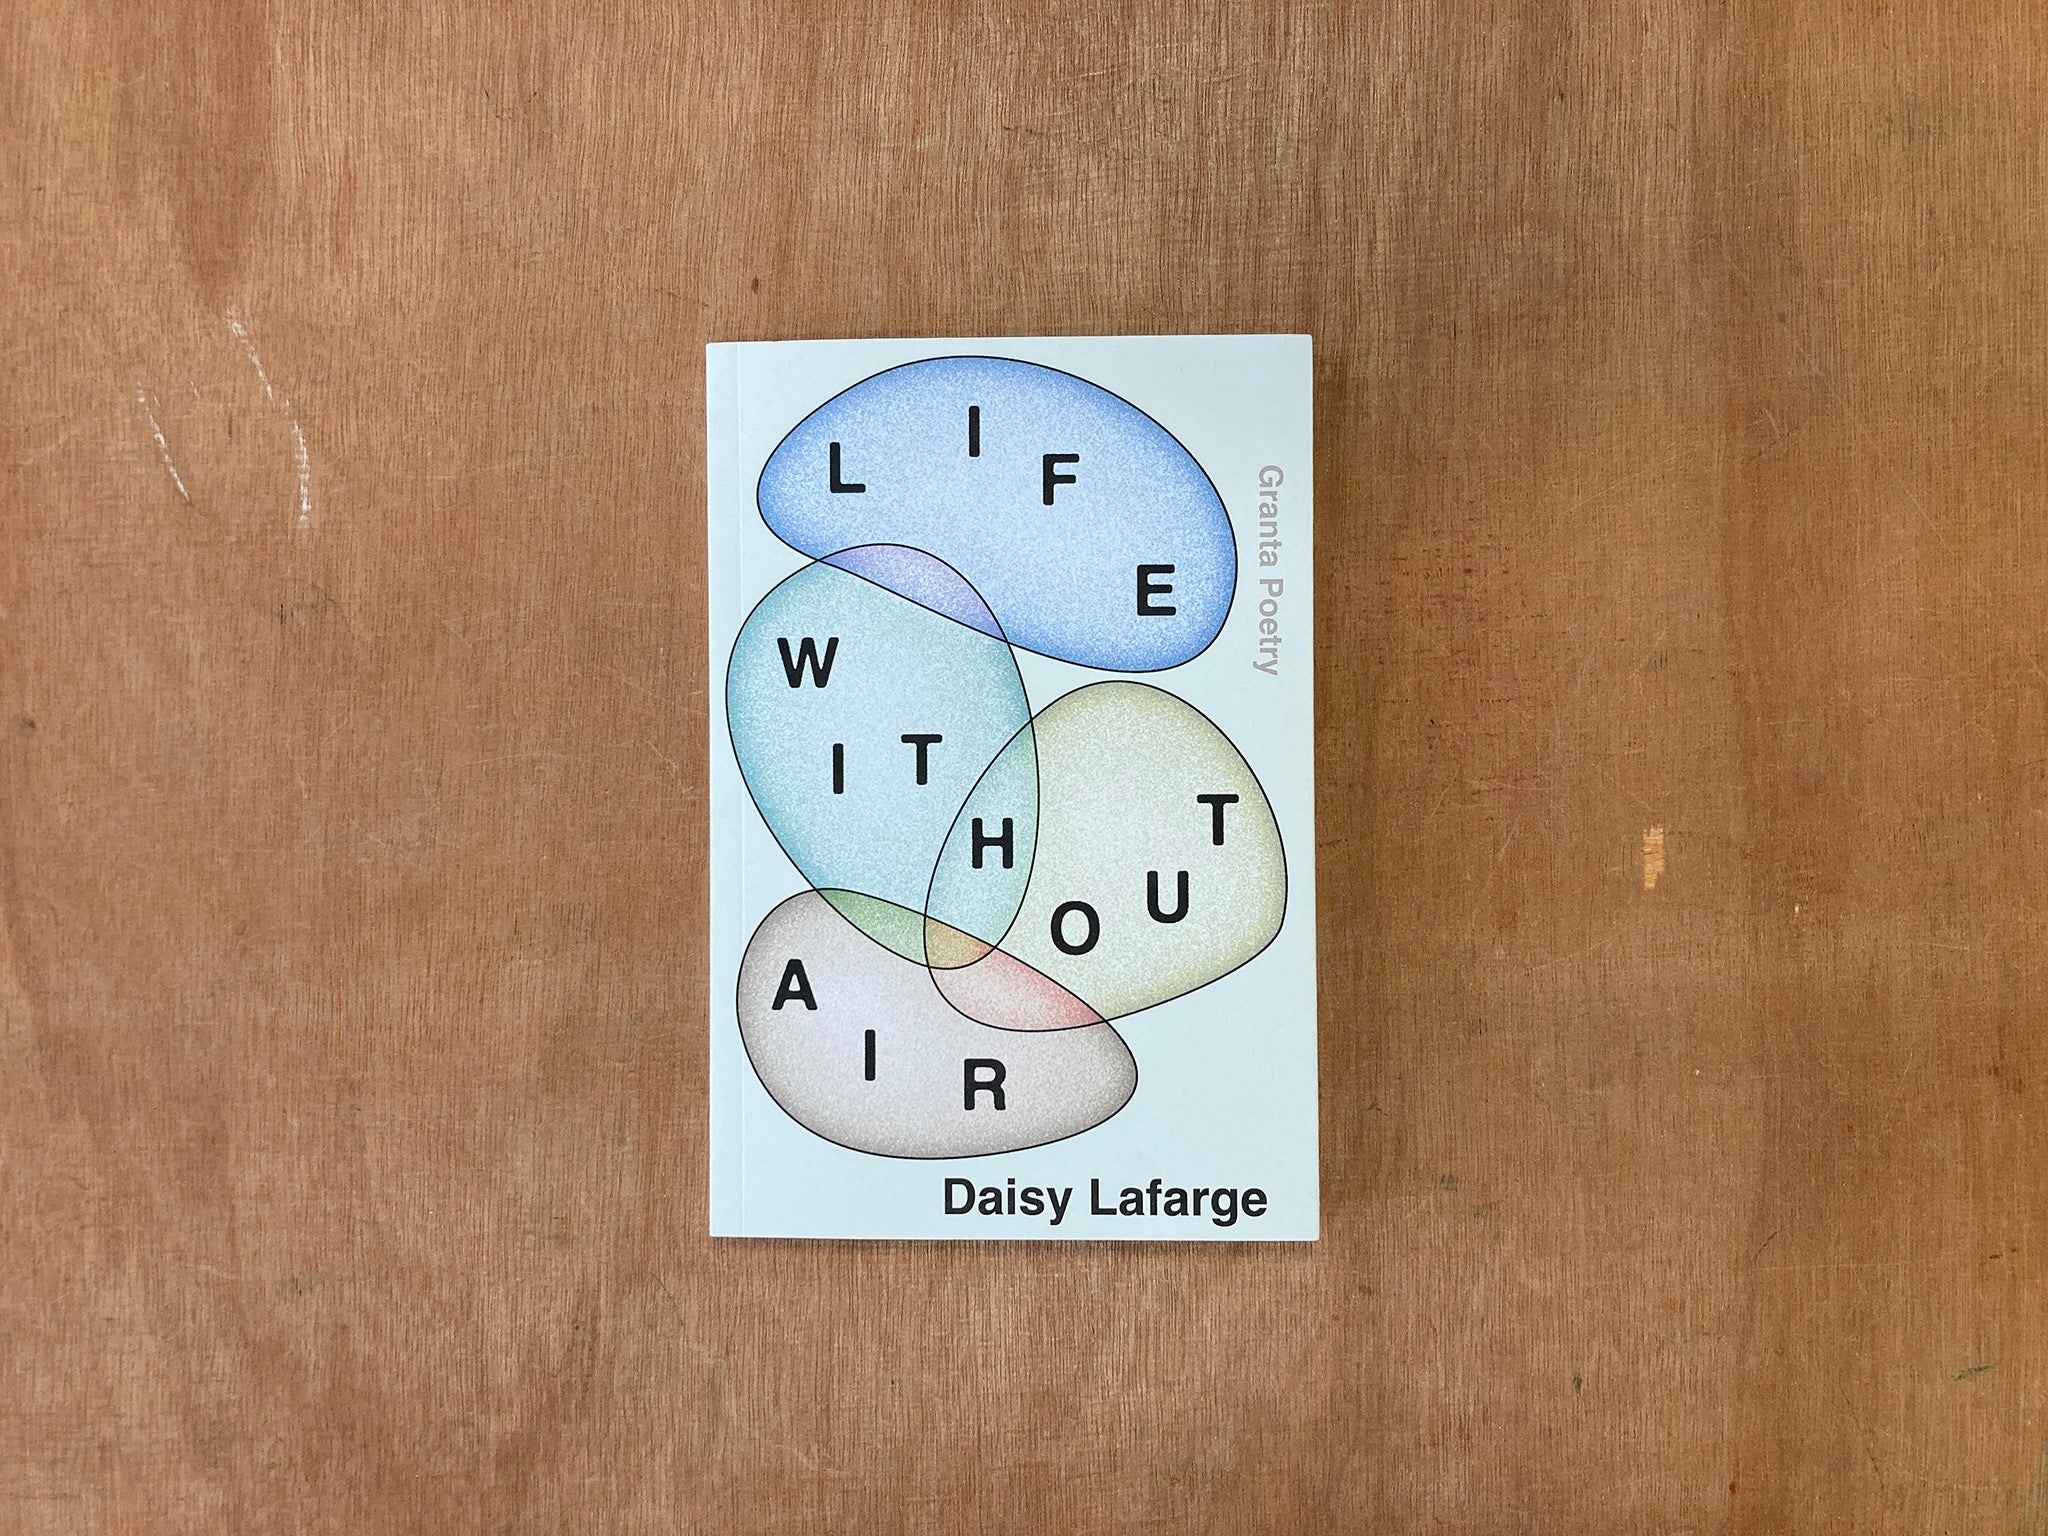 LIFE WITHOUT AIR by Daisy Lafarge